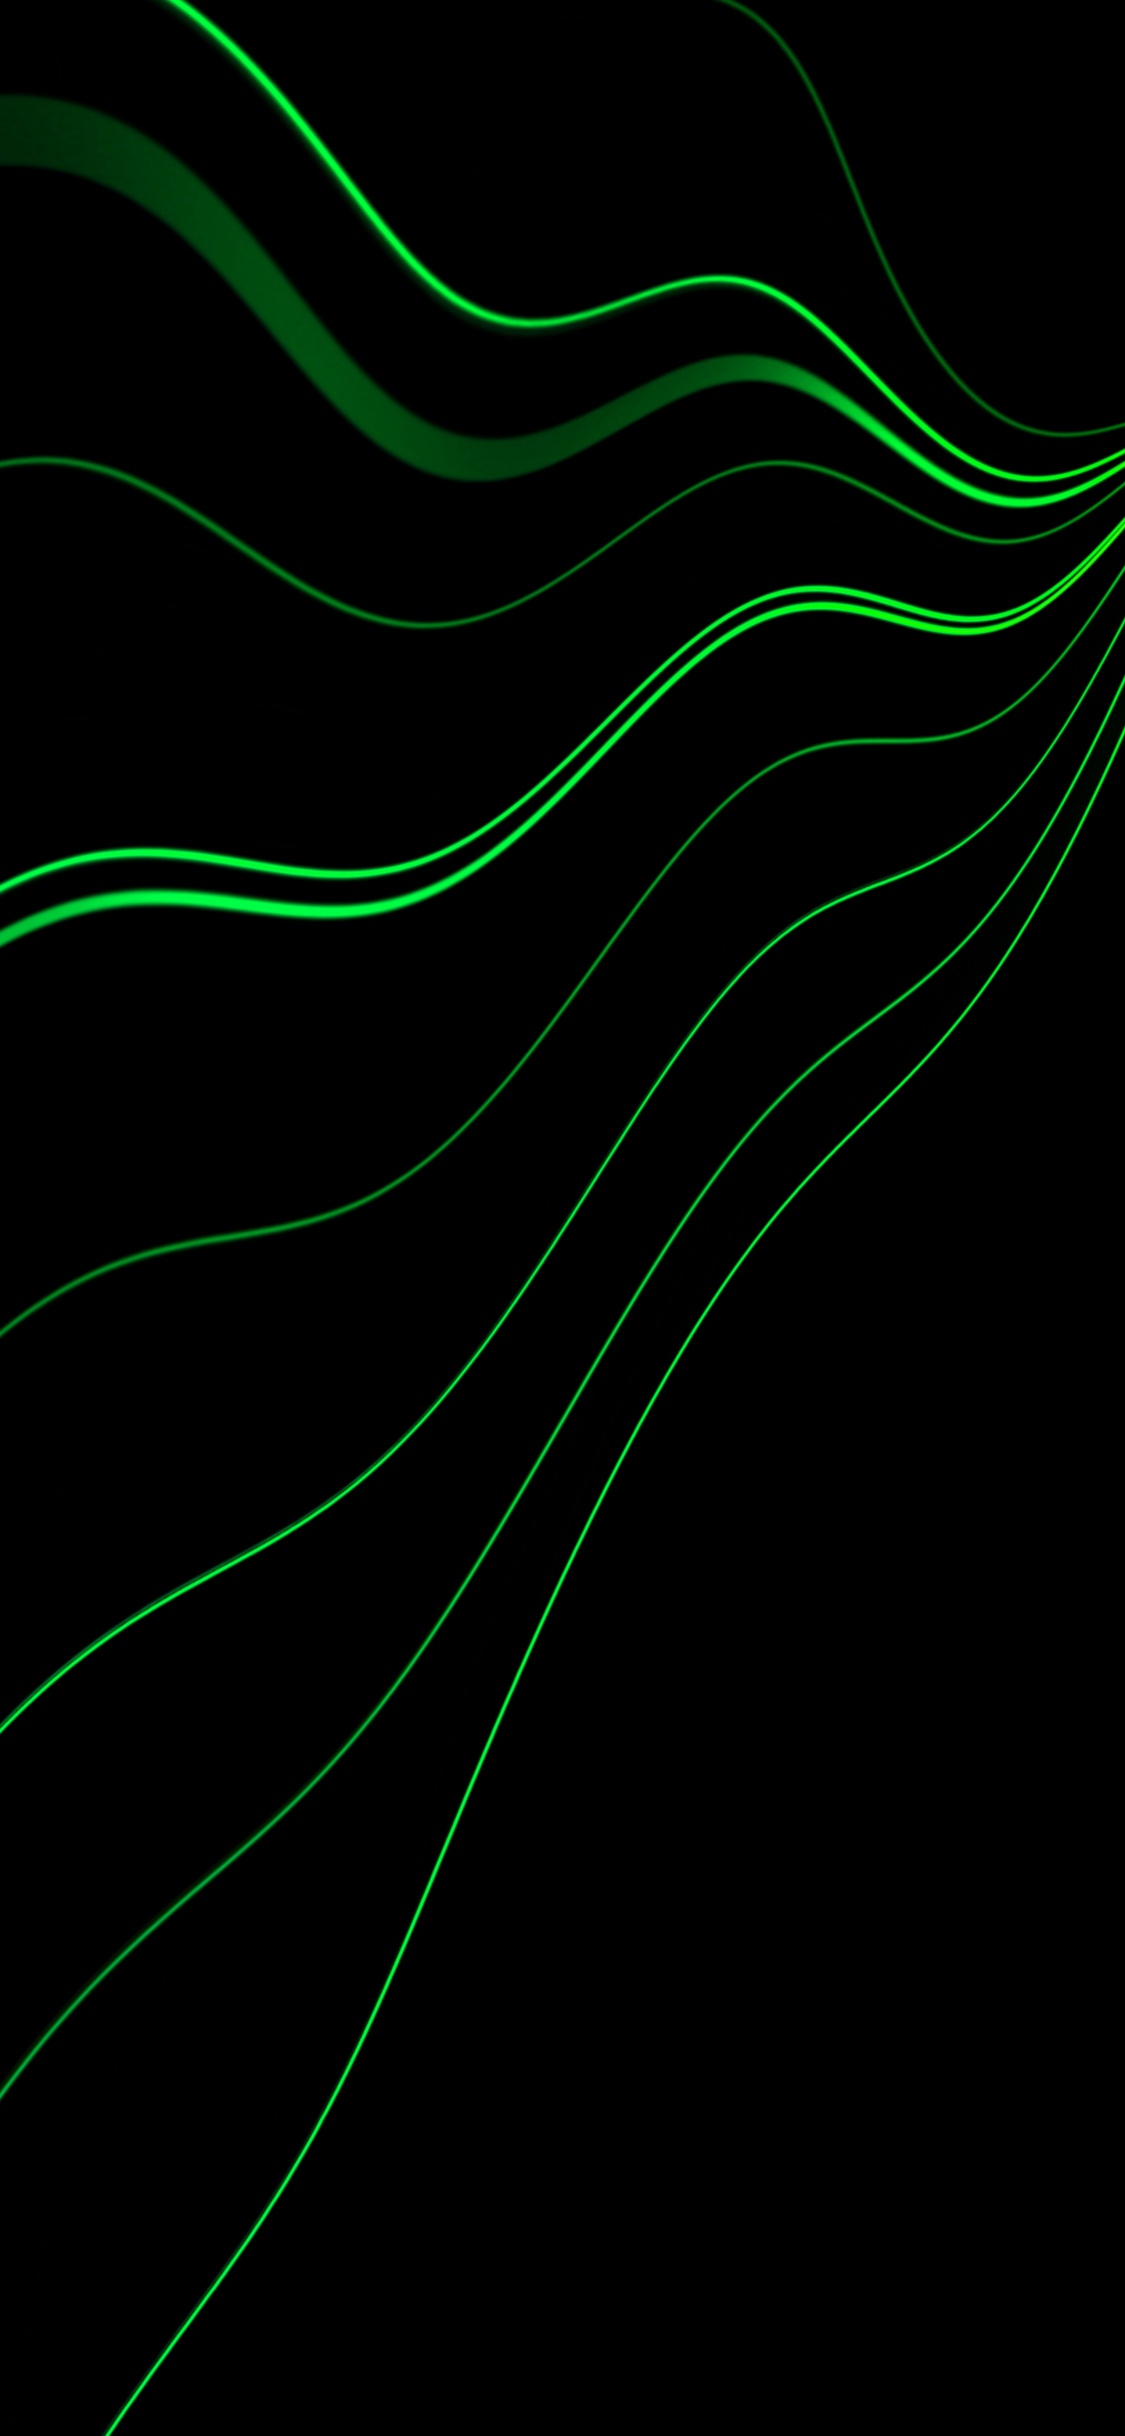 Green and White Line Illustration. Wallpaper in 1125x2436 Resolution